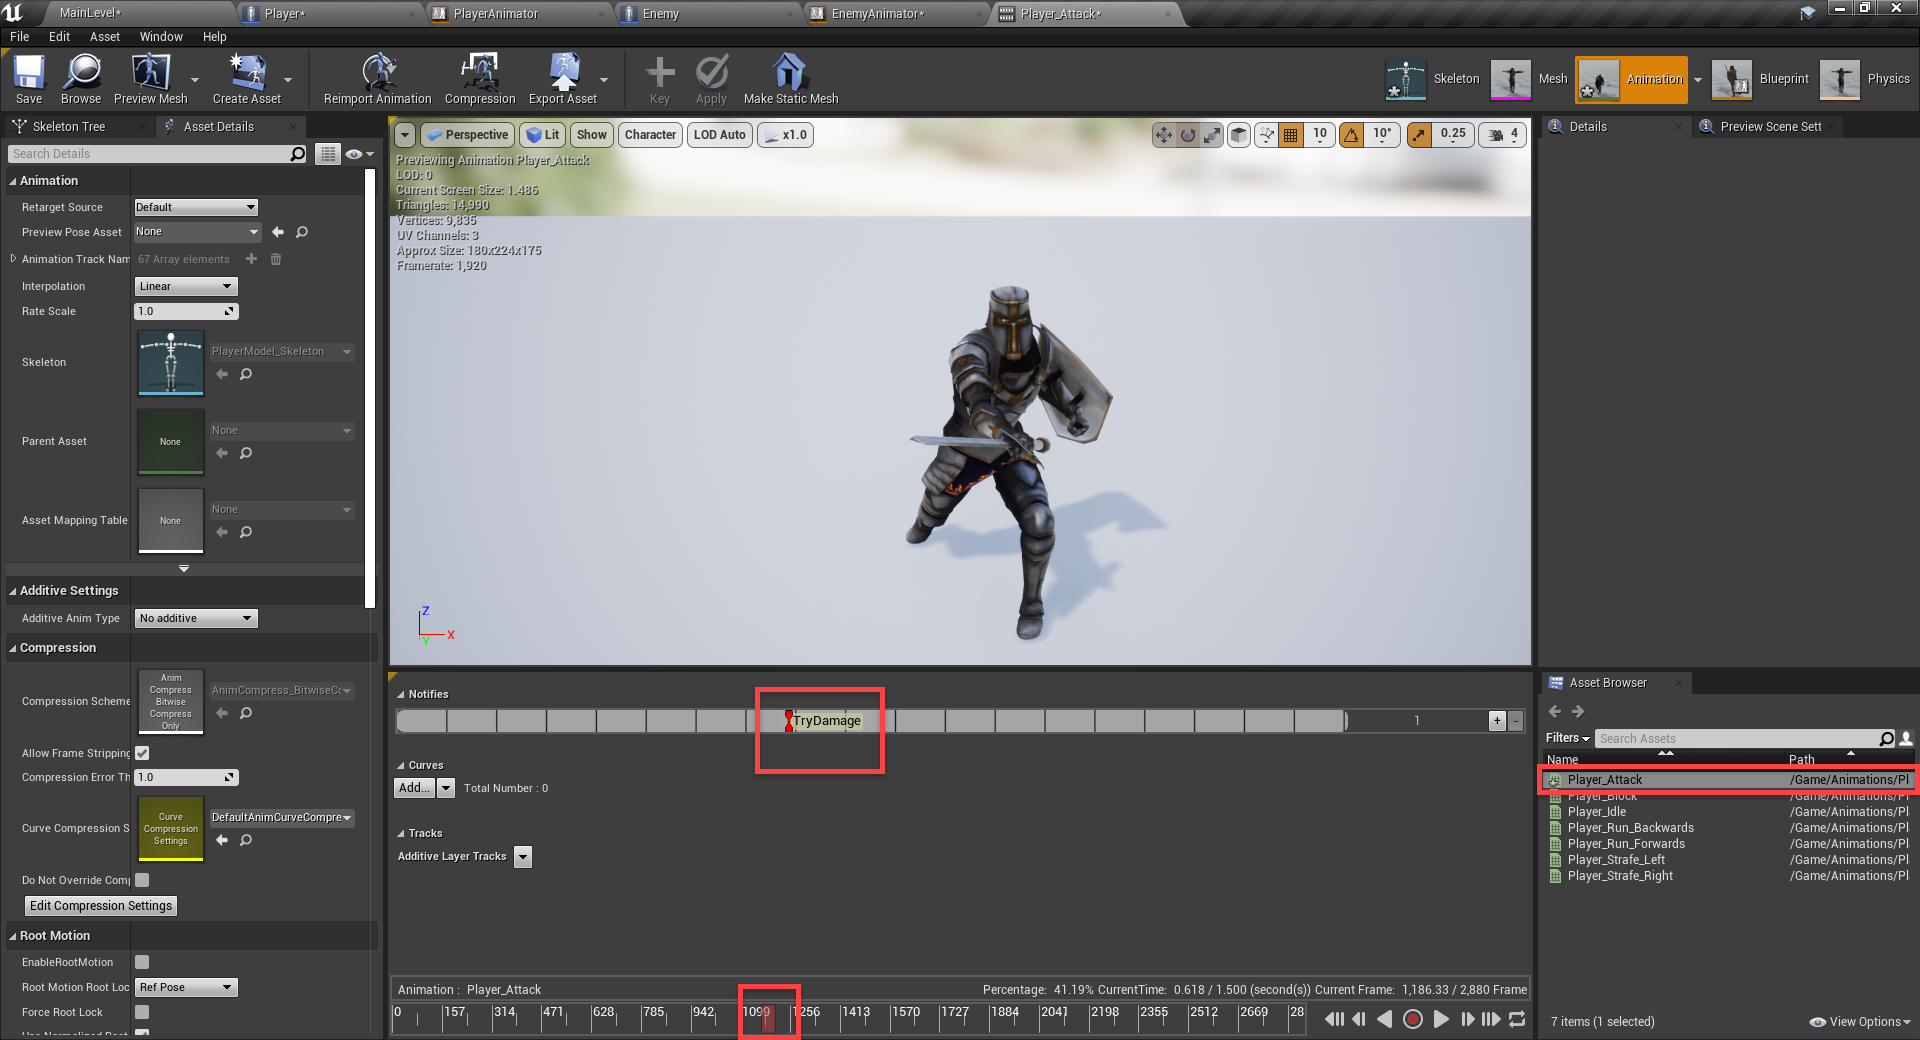 Unreal Engine animation with Try Damage function trigger added